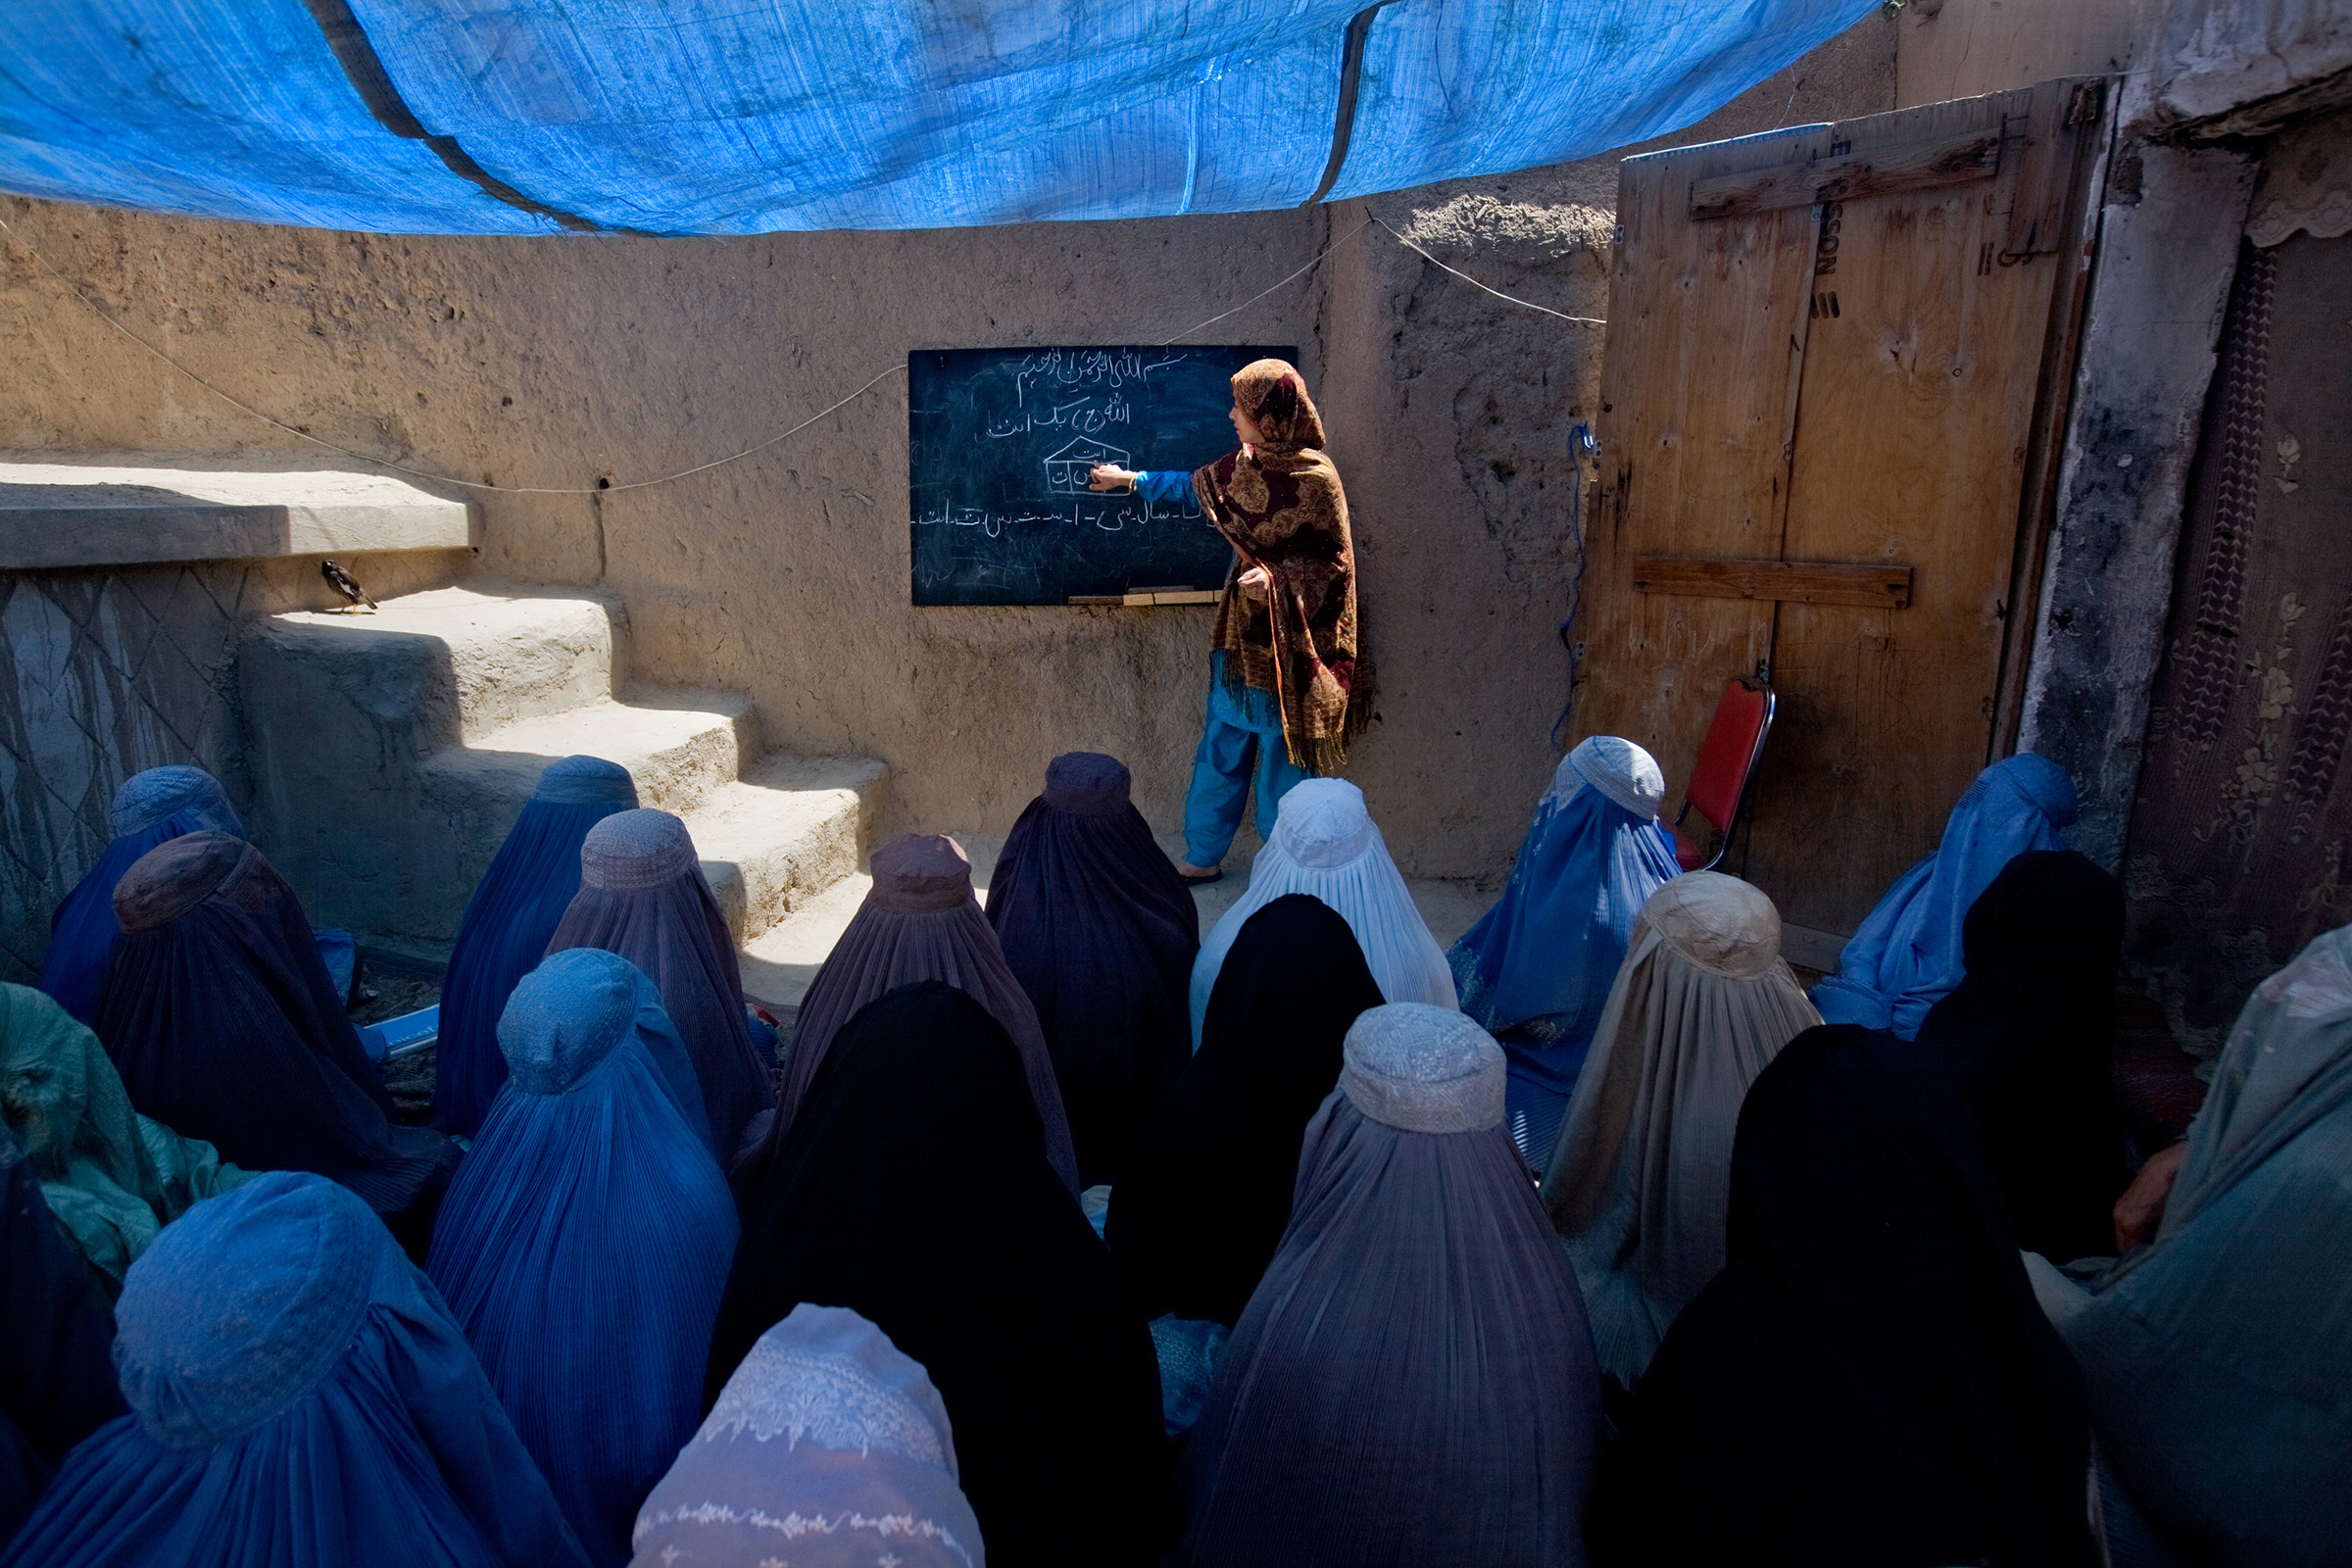 Marzia teaches first grade at a private residence in Kandahar on April 20, 2009. Security concerns prompt the girls to wear burqas when outsiders visit, but Marzia refused to wear hers. Deteriorating security and a shortage of schools for girls have prompted discreet classrooms to spring up in area homes.